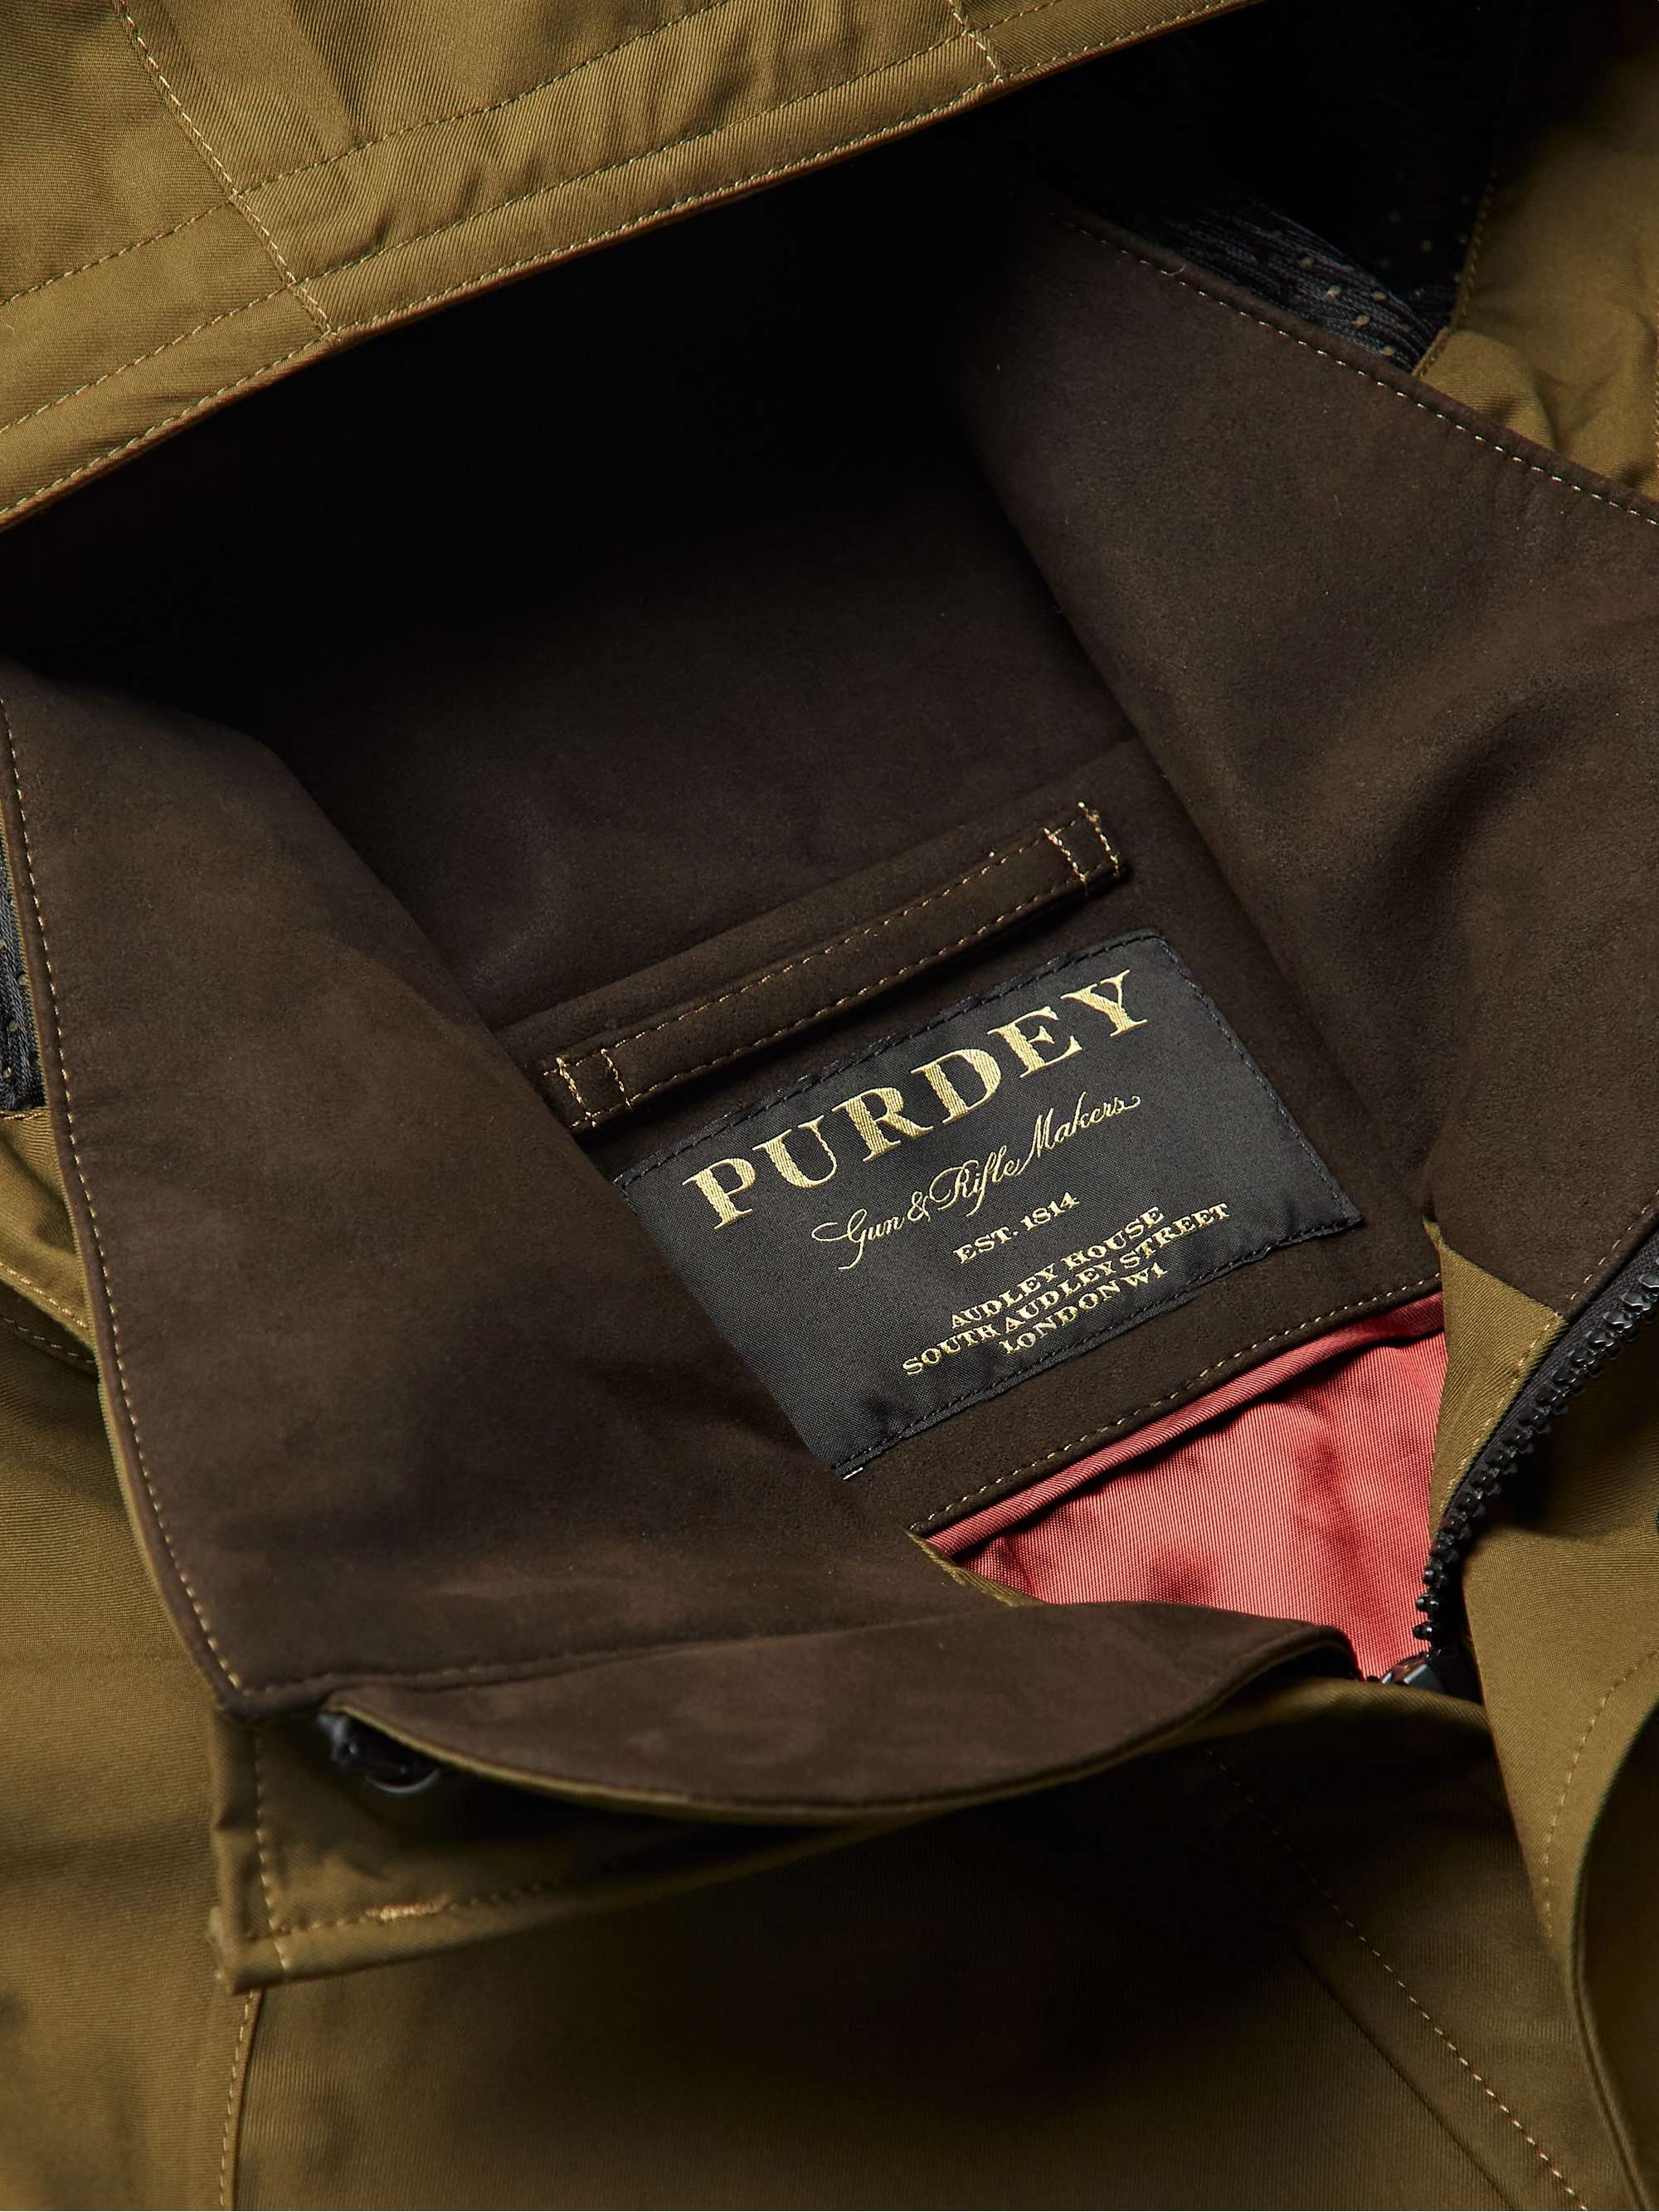 PURDEY Shell Hooded Jacket